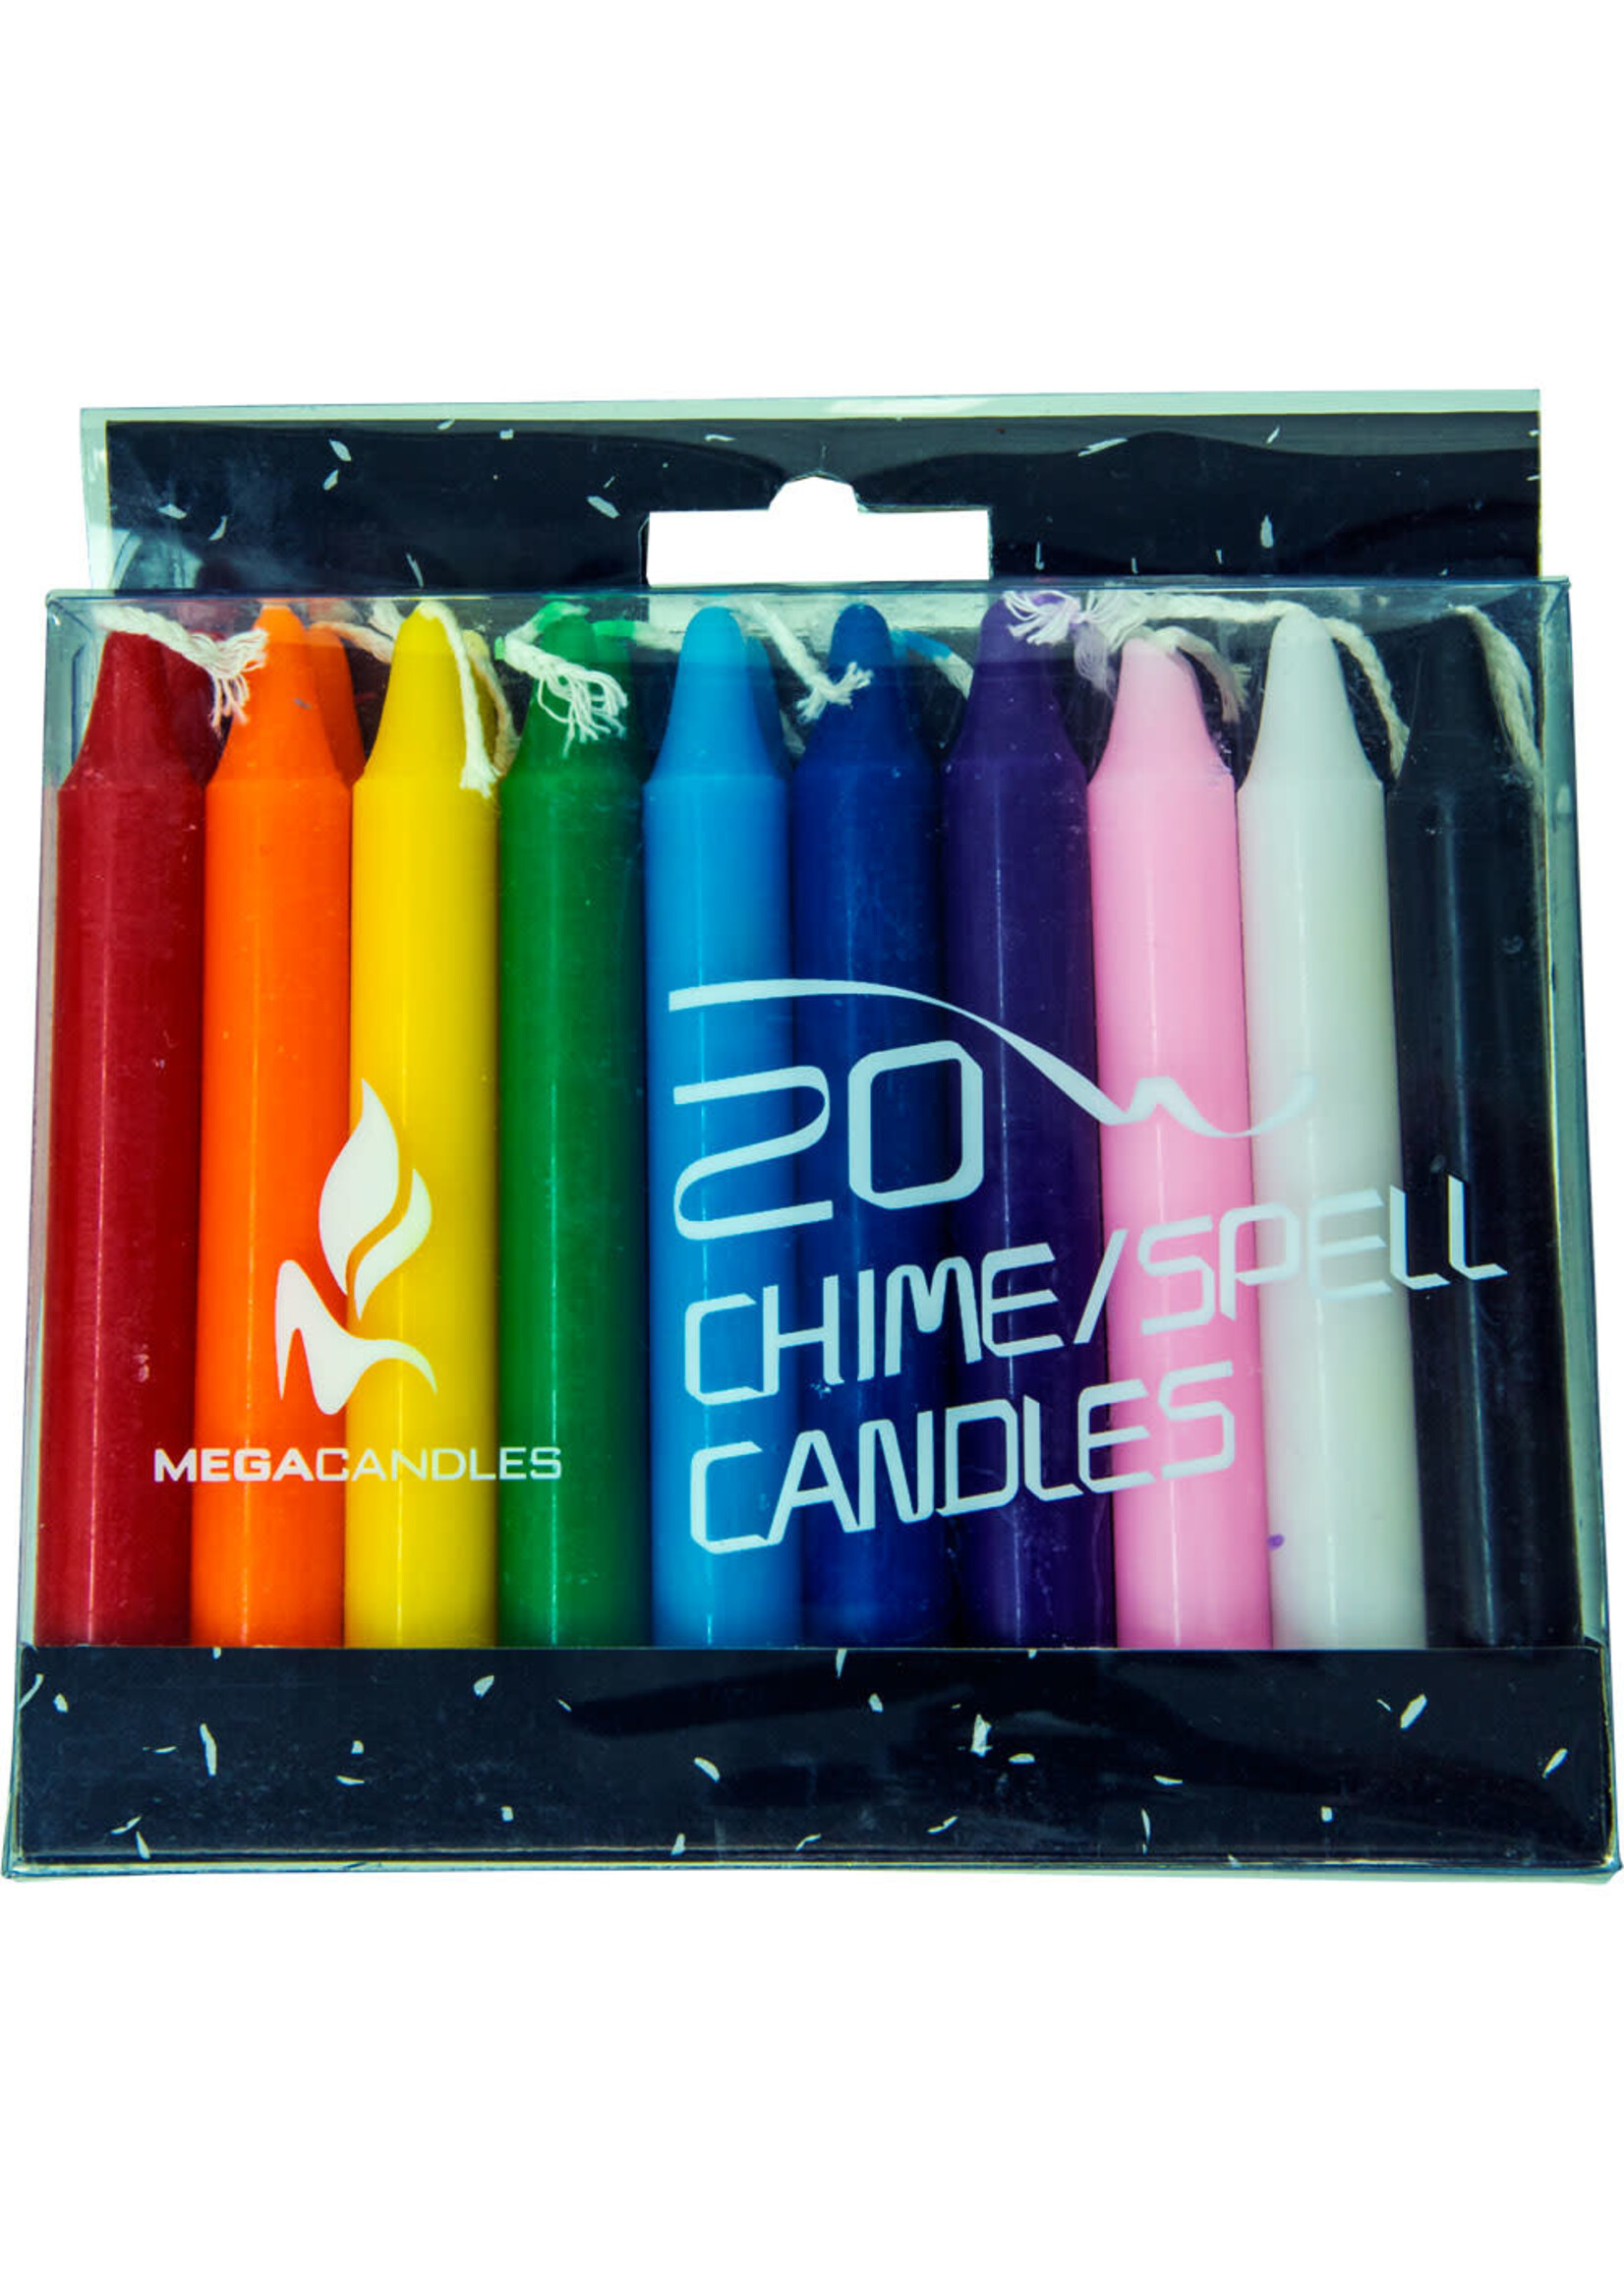 Box of 20 Chime Candles, Assorted Colors